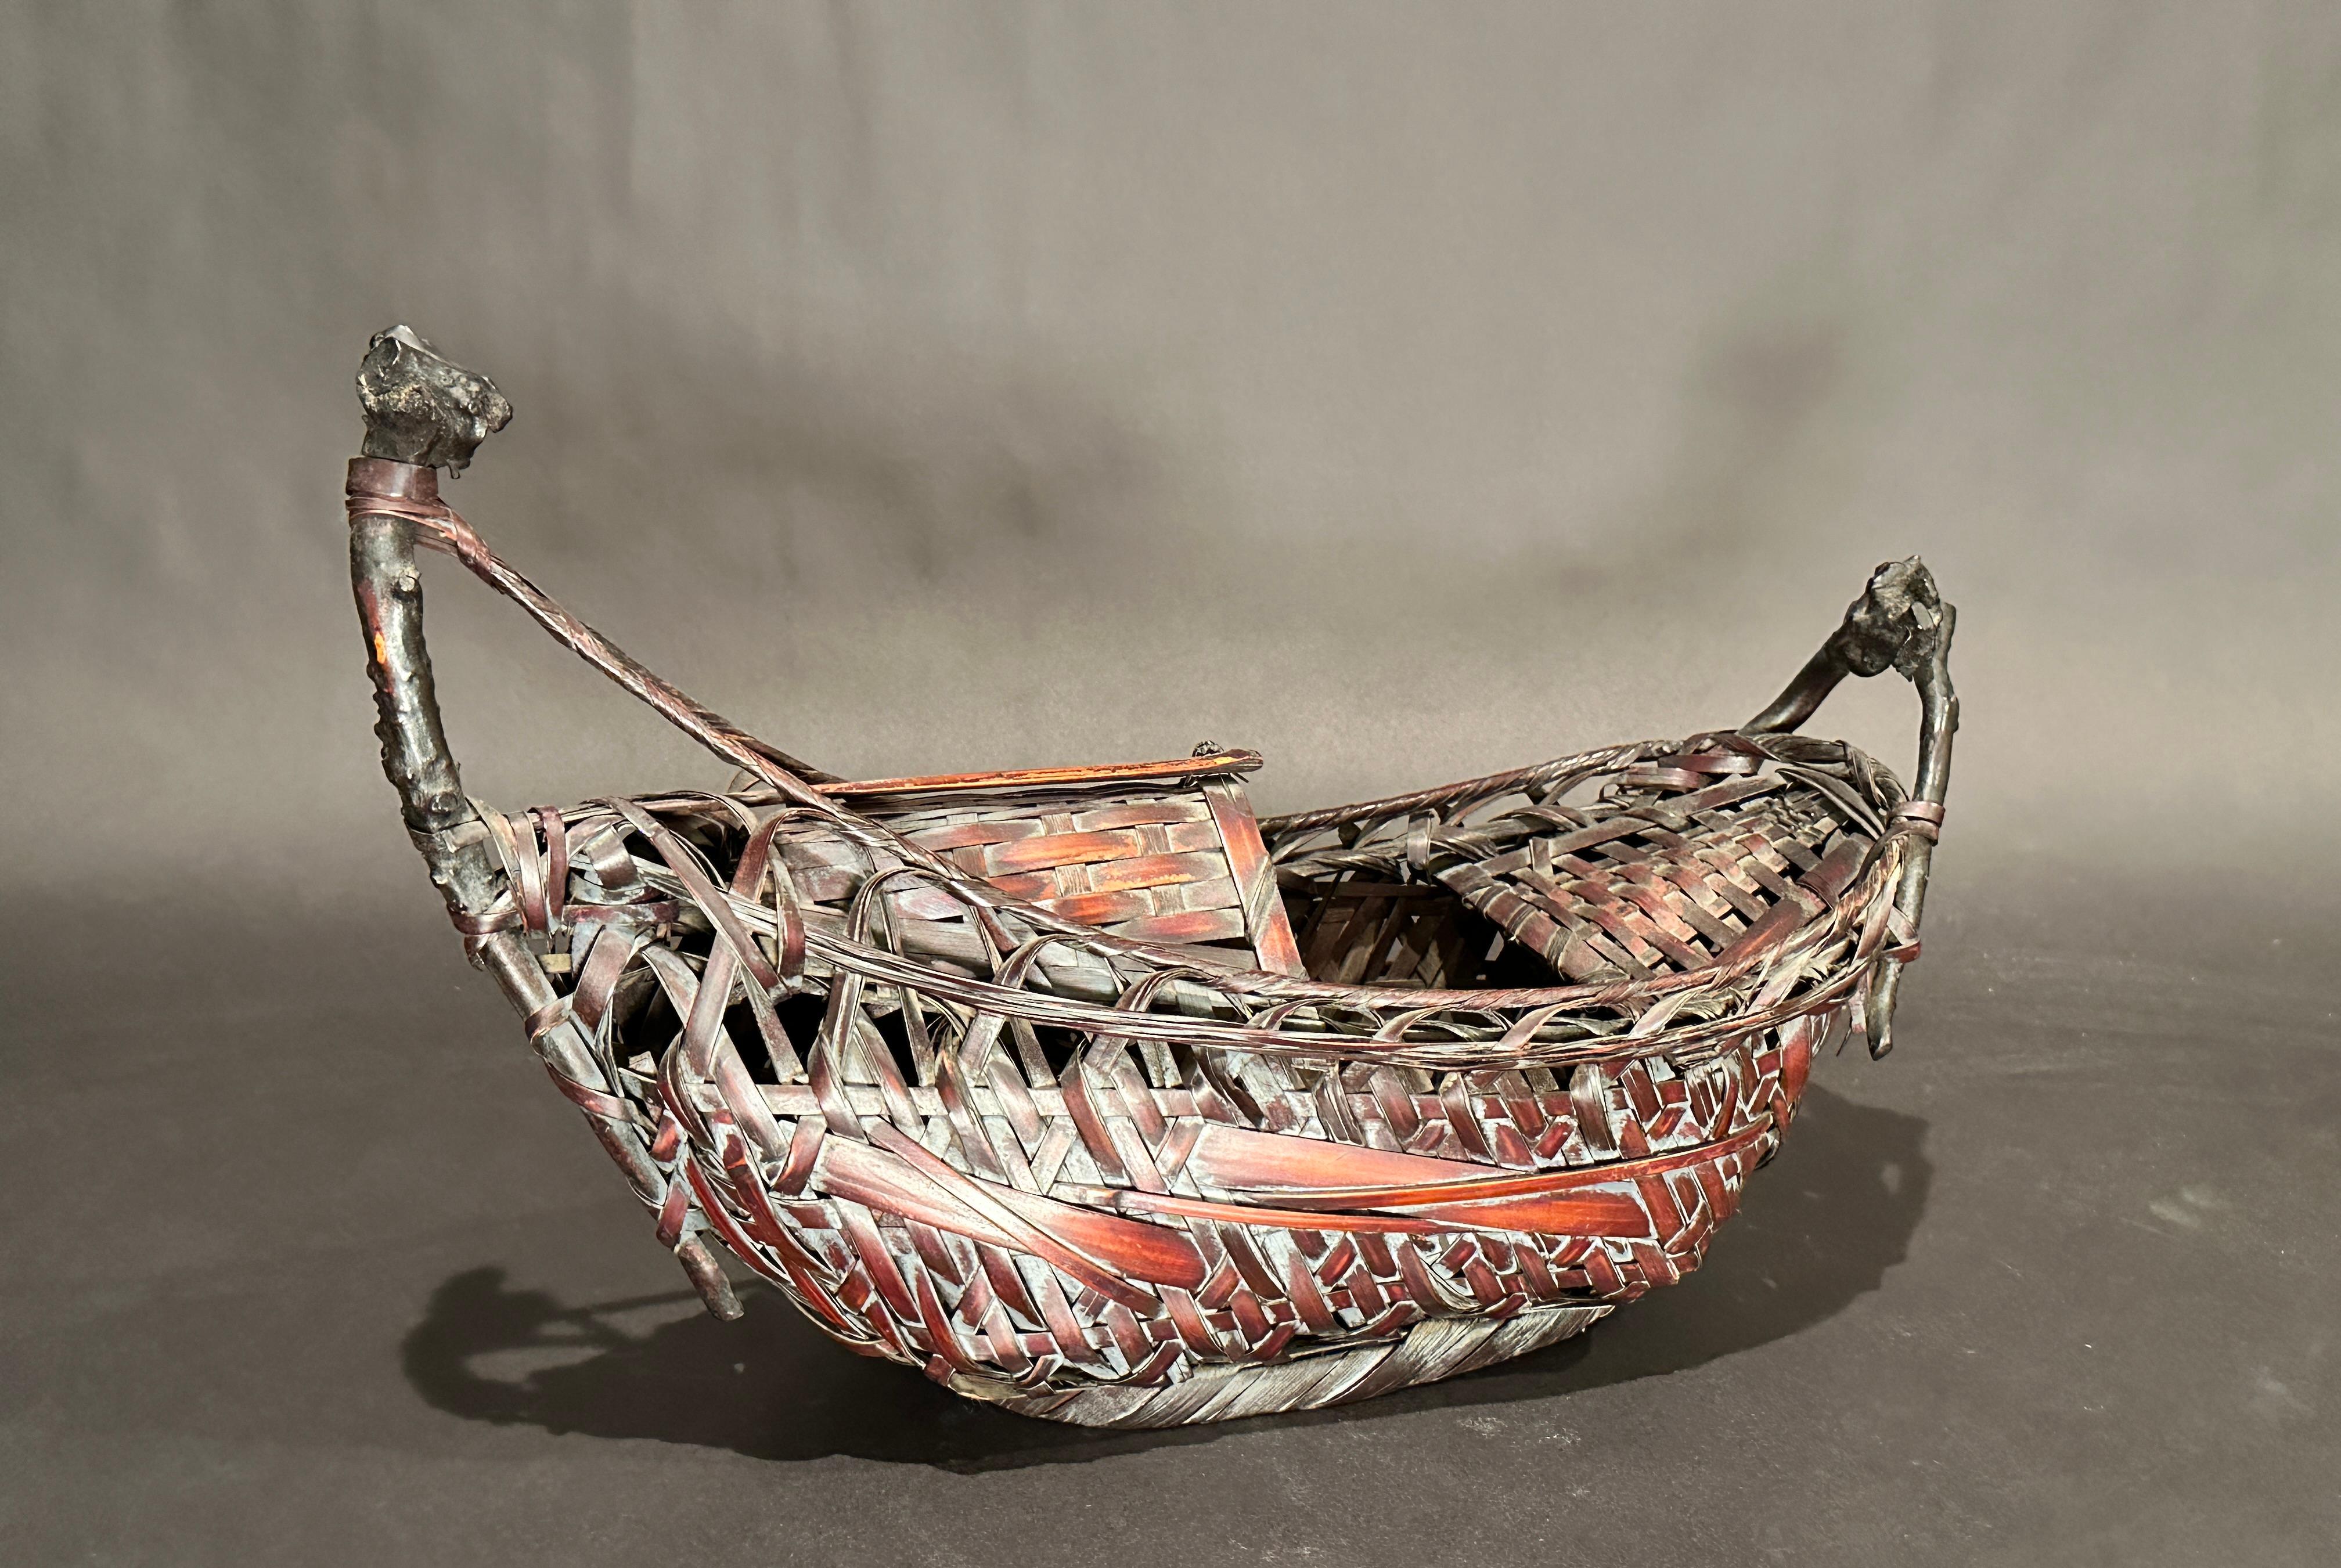 Antique Japanese woven boat shape (funagata) Ikebana flower basket, with lacquer,975 rattan, root and smoked bamboo. Fine quality weaving with wonderful patina.